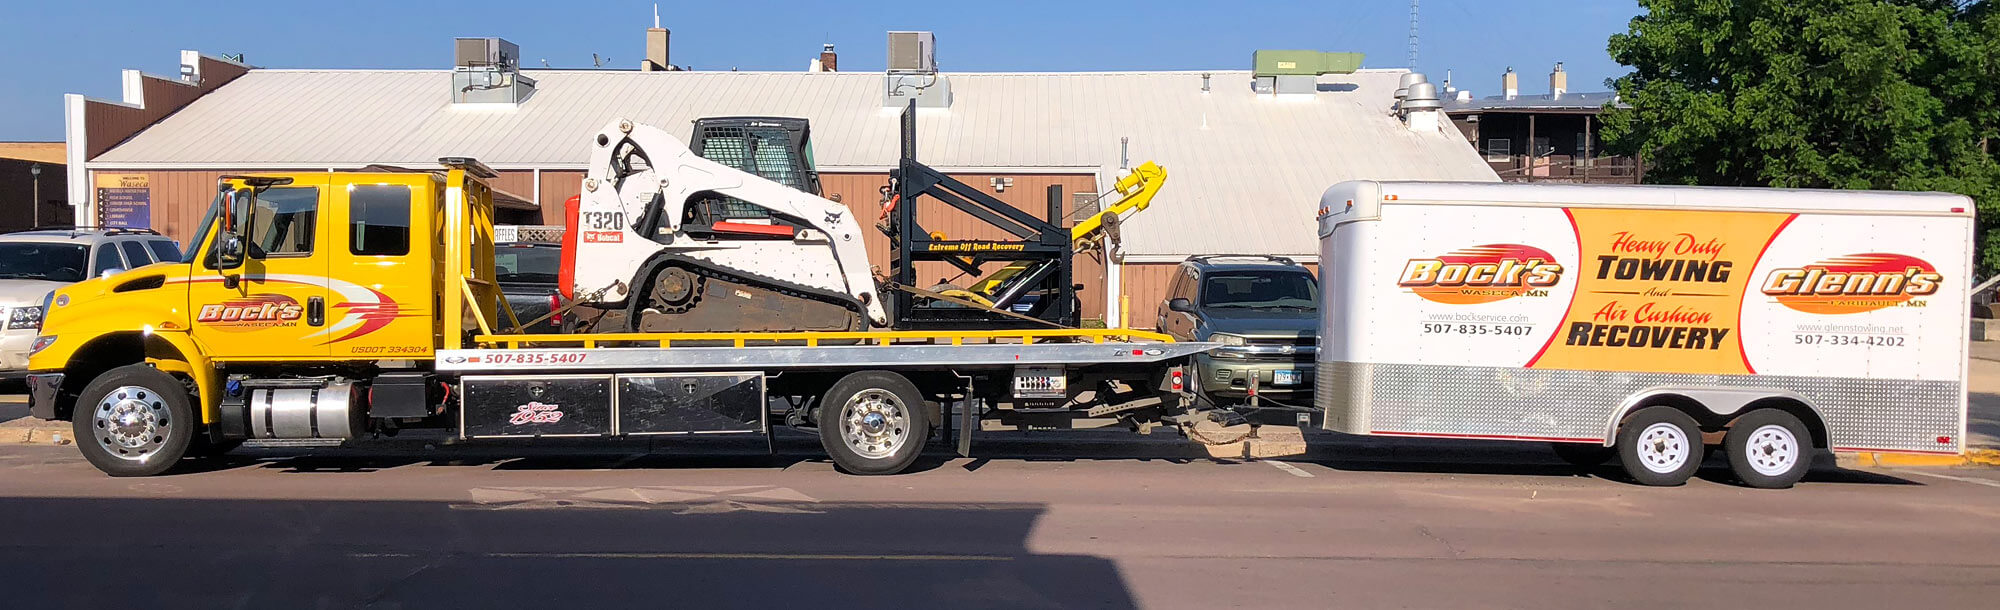 Bock's Service flatbed tow truck hauling a skid loader with a winch attachment used for off road recovery of equipment